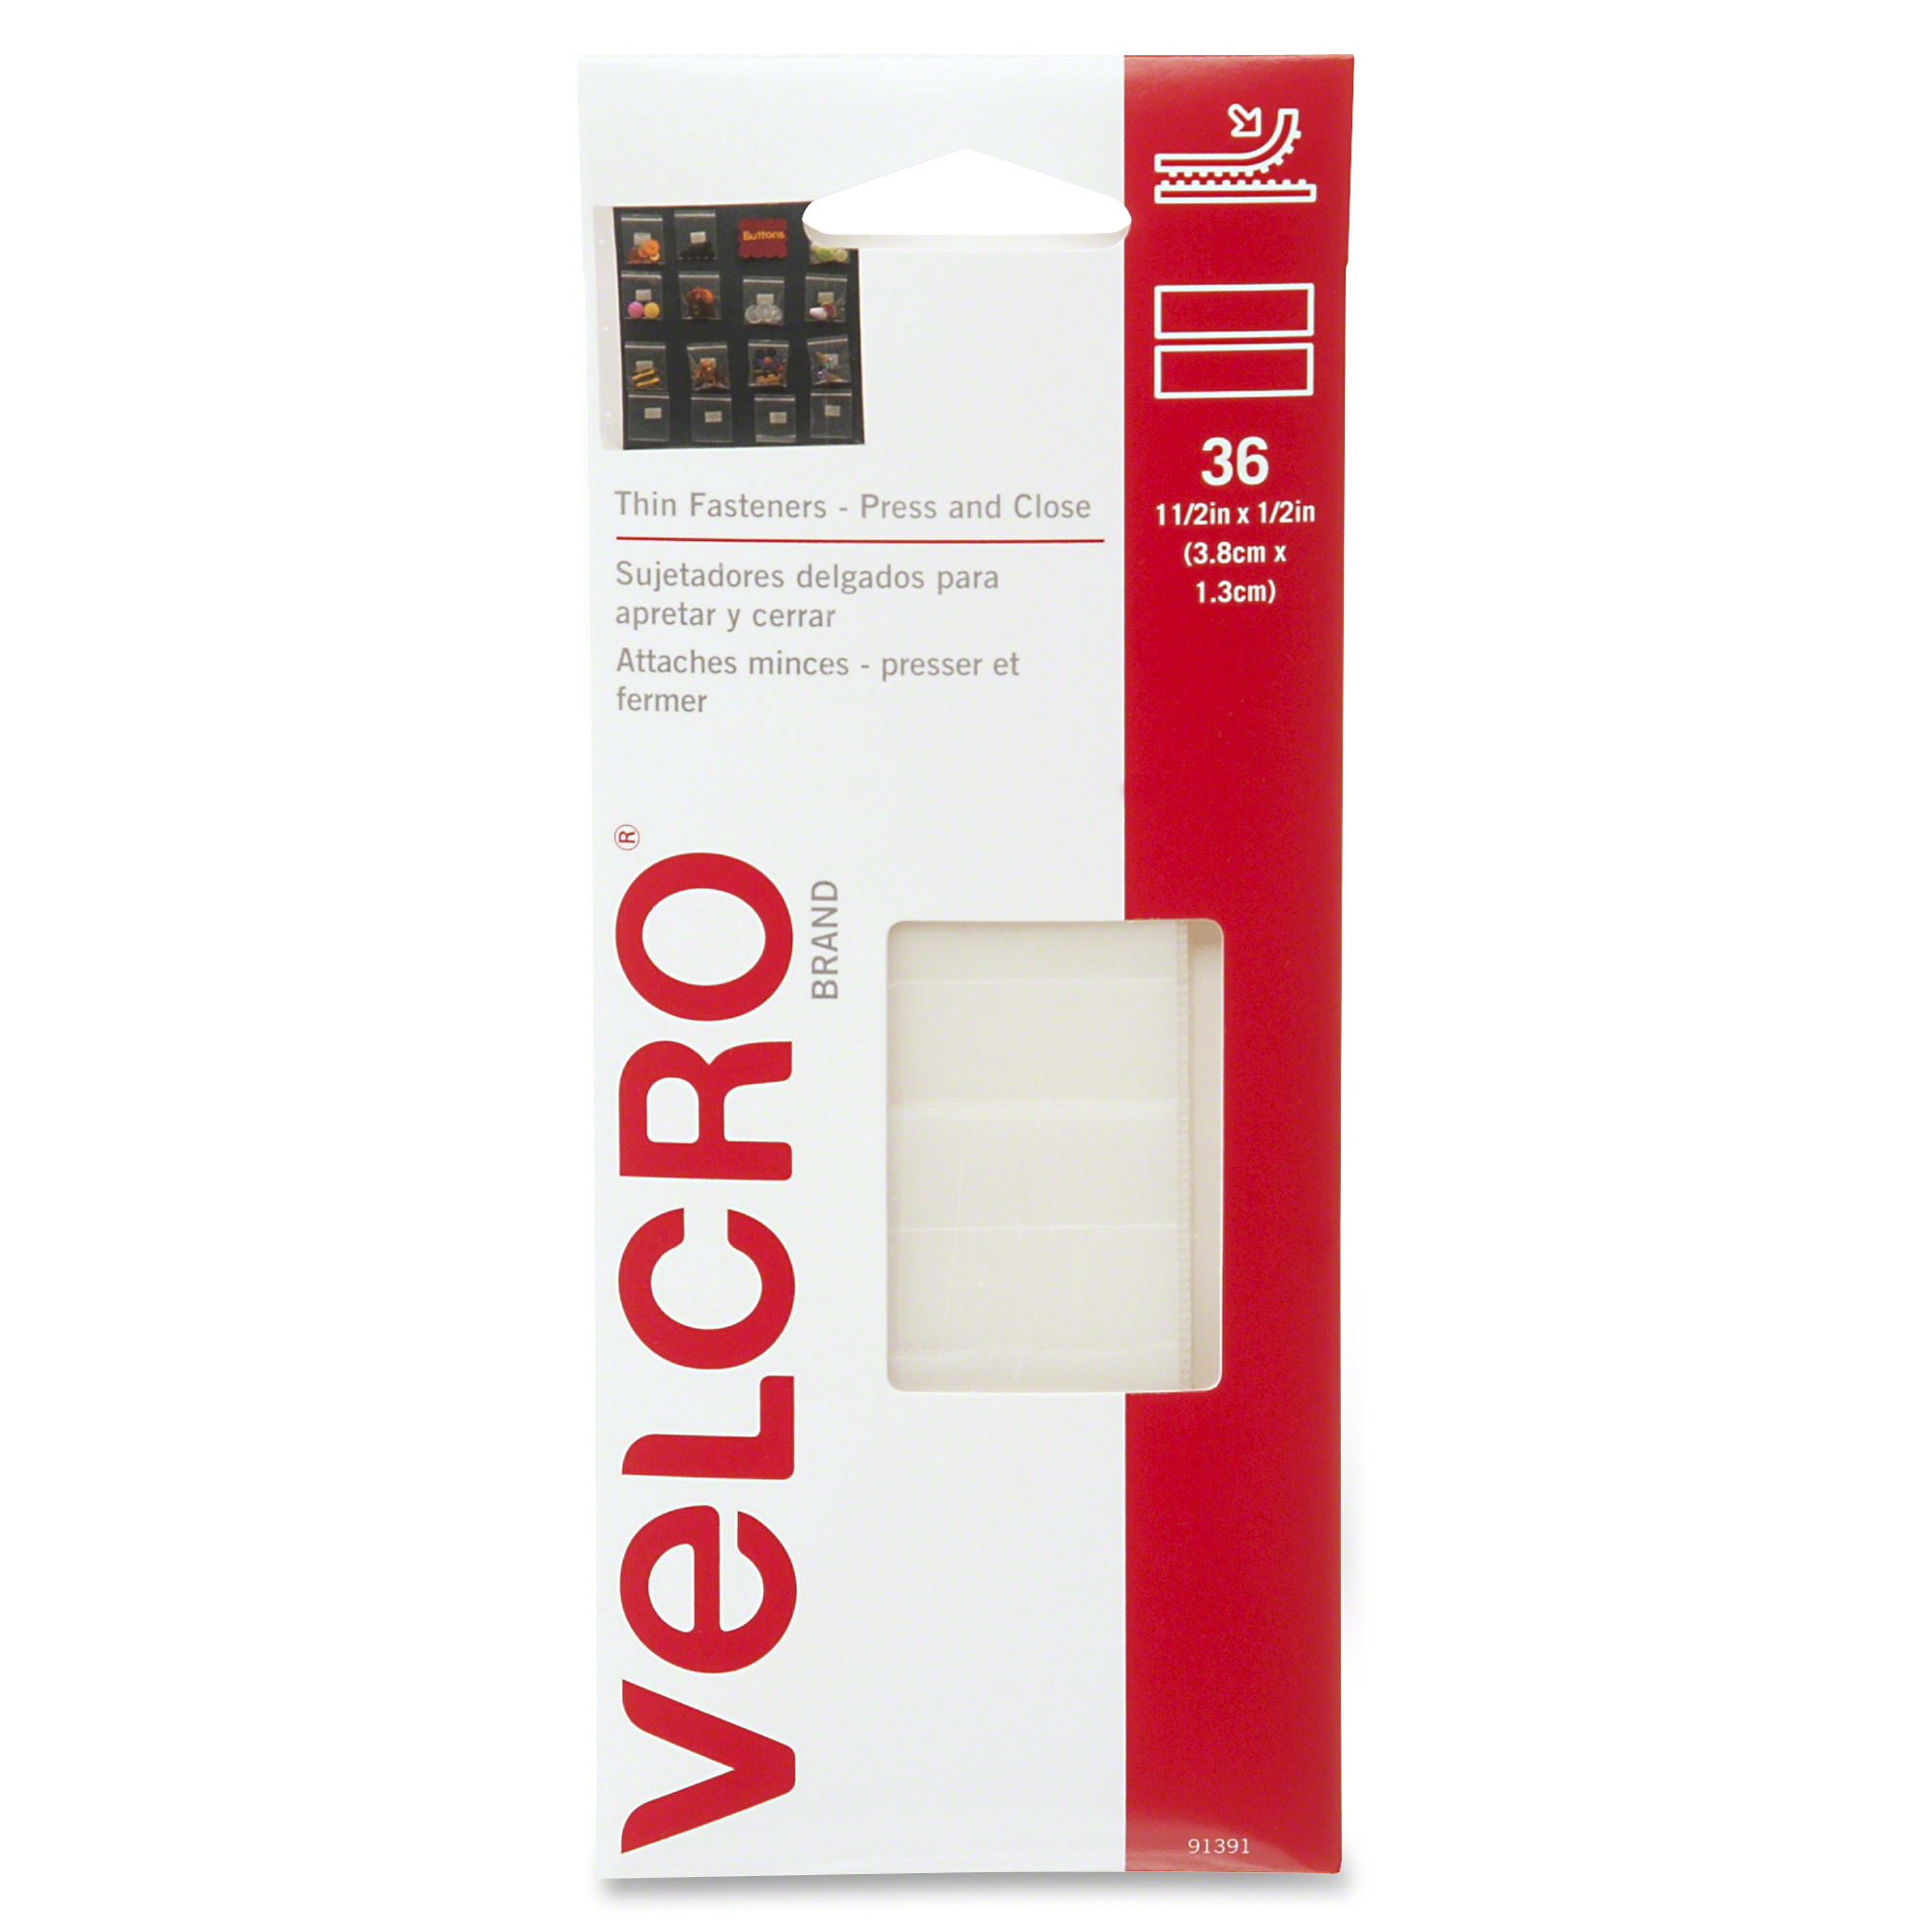 VELCRO® Brand Thin Fasteners - Press and Close 1 1/2in x 1/2in strips. 36 ct - image 2 of 2